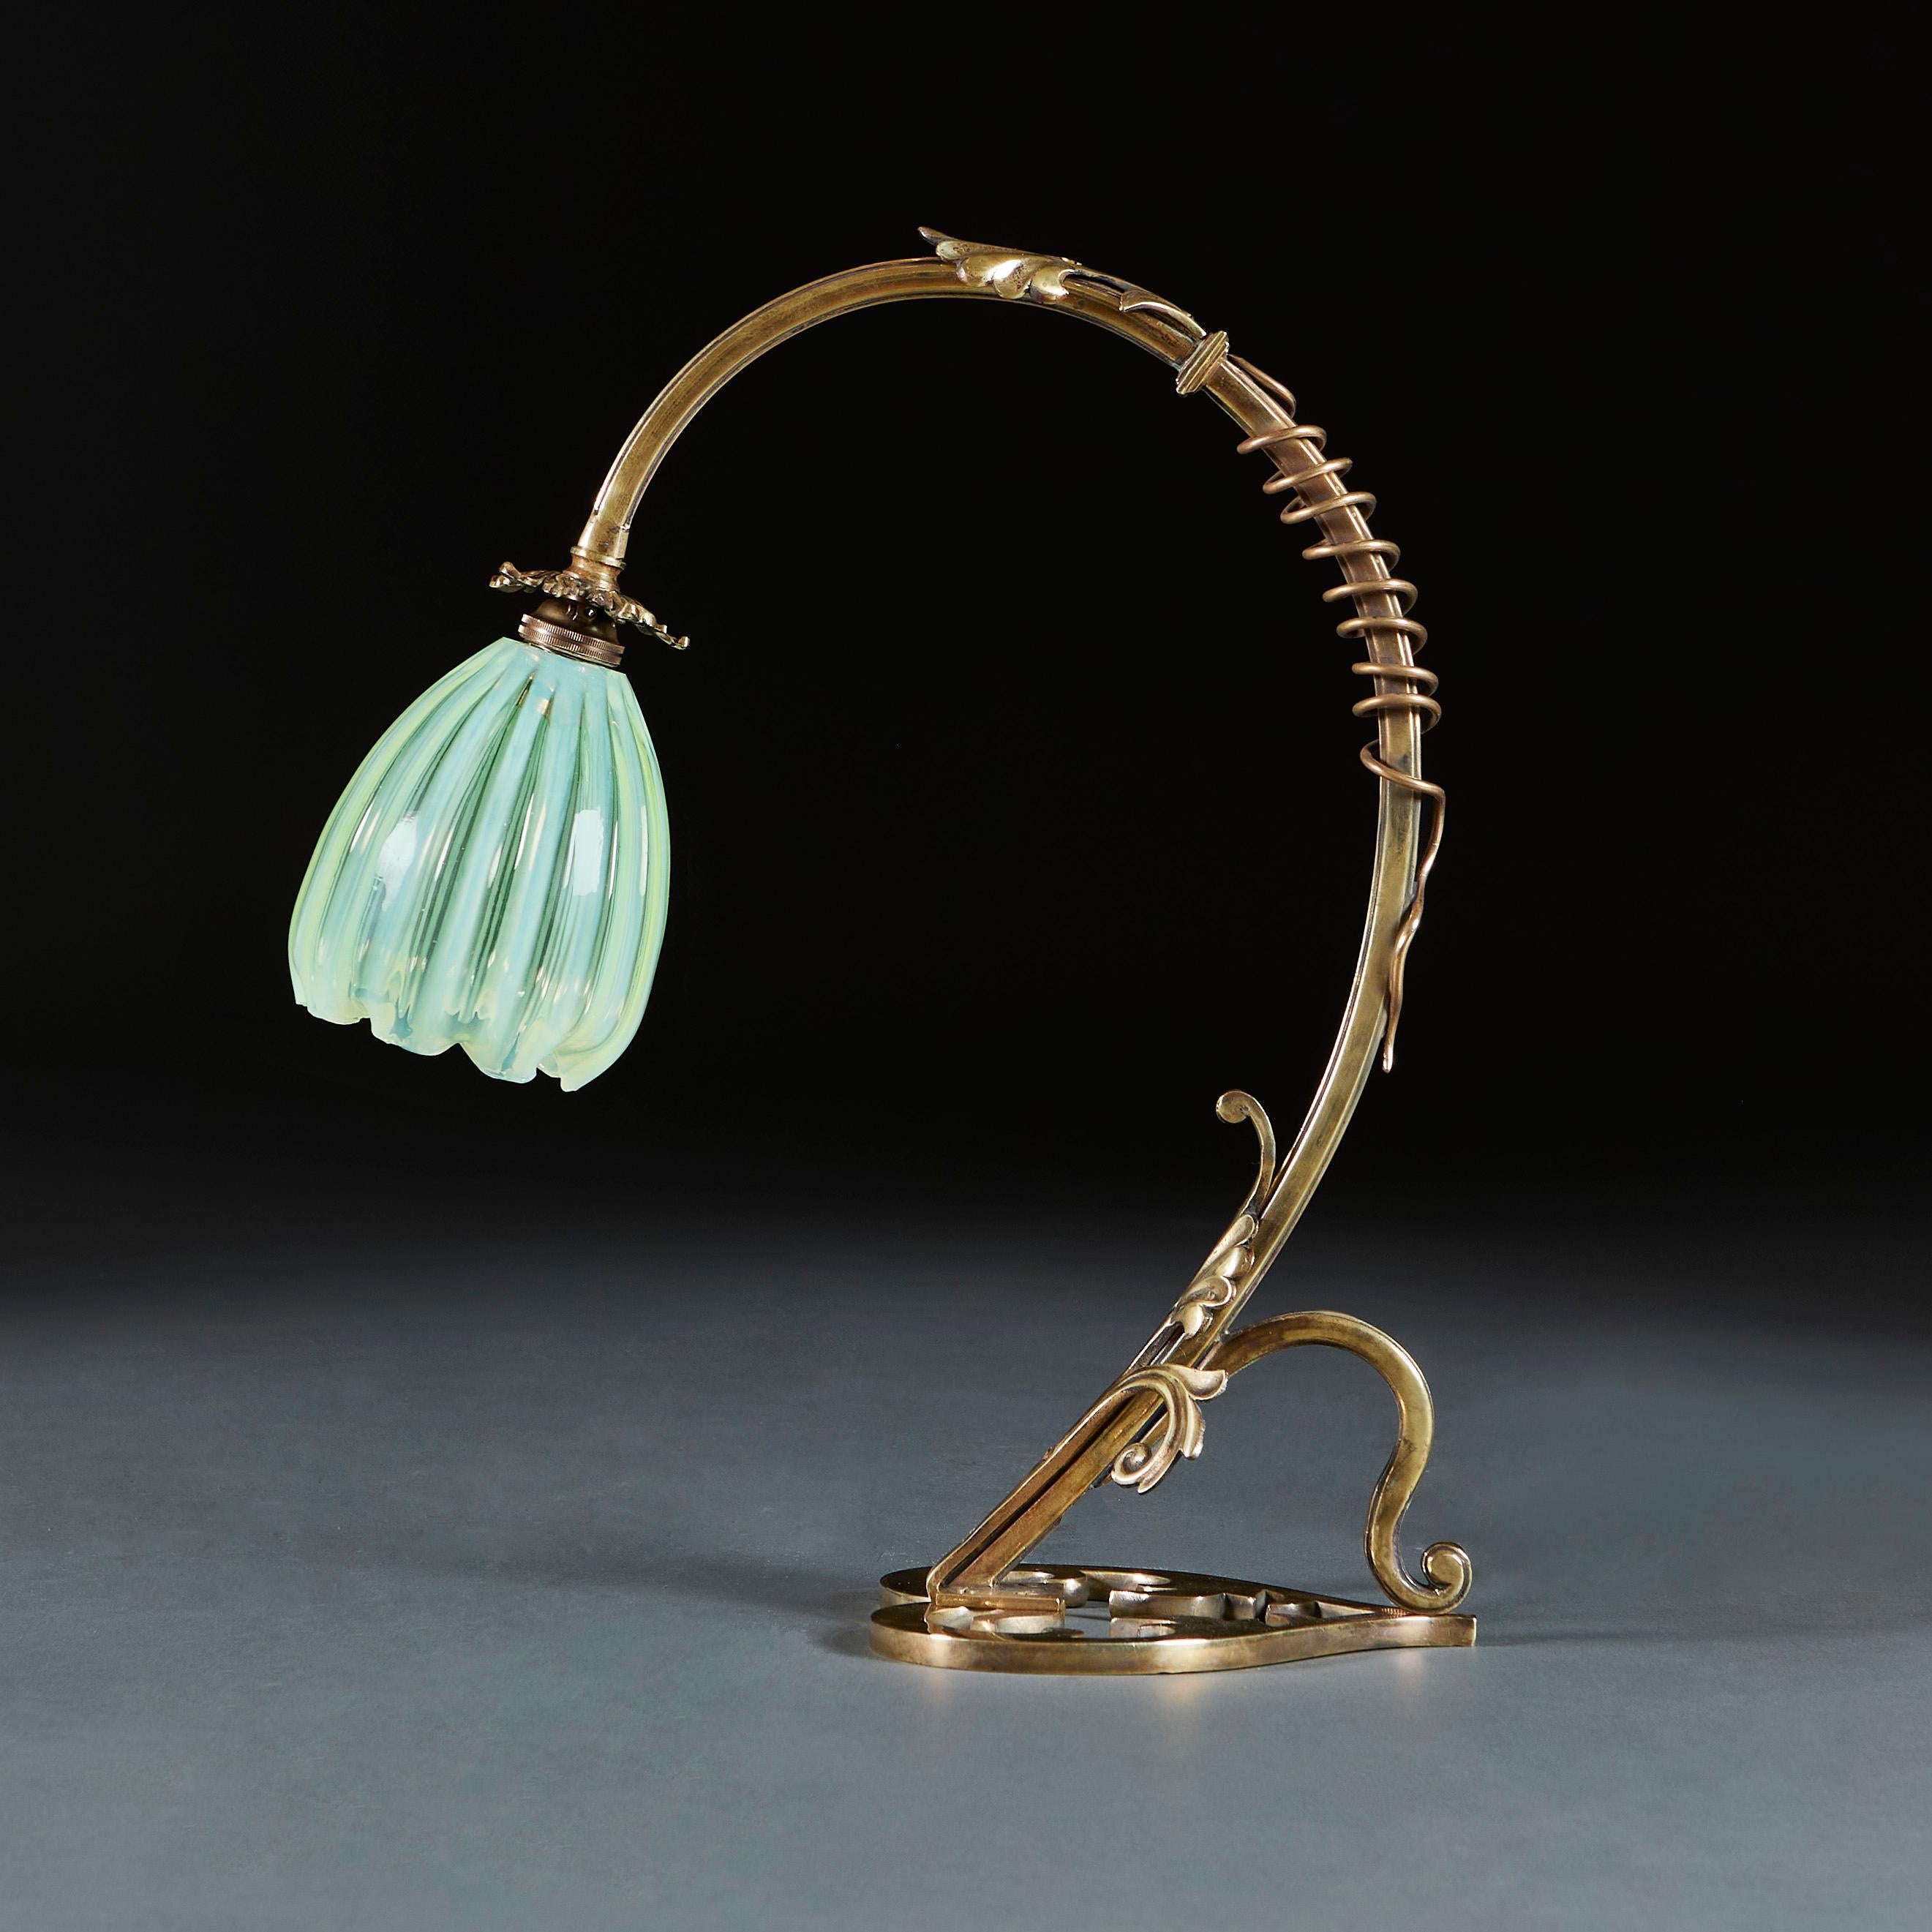 England, circa 1900

An unusual brass lamp with curved neck wrapped with scrolling vine, the heart shape base pierced with foliate form, with original opaline glass shade.

Height 42.00cm
Width 36.00cm
Depth 17.00cm

Please note: This is currently